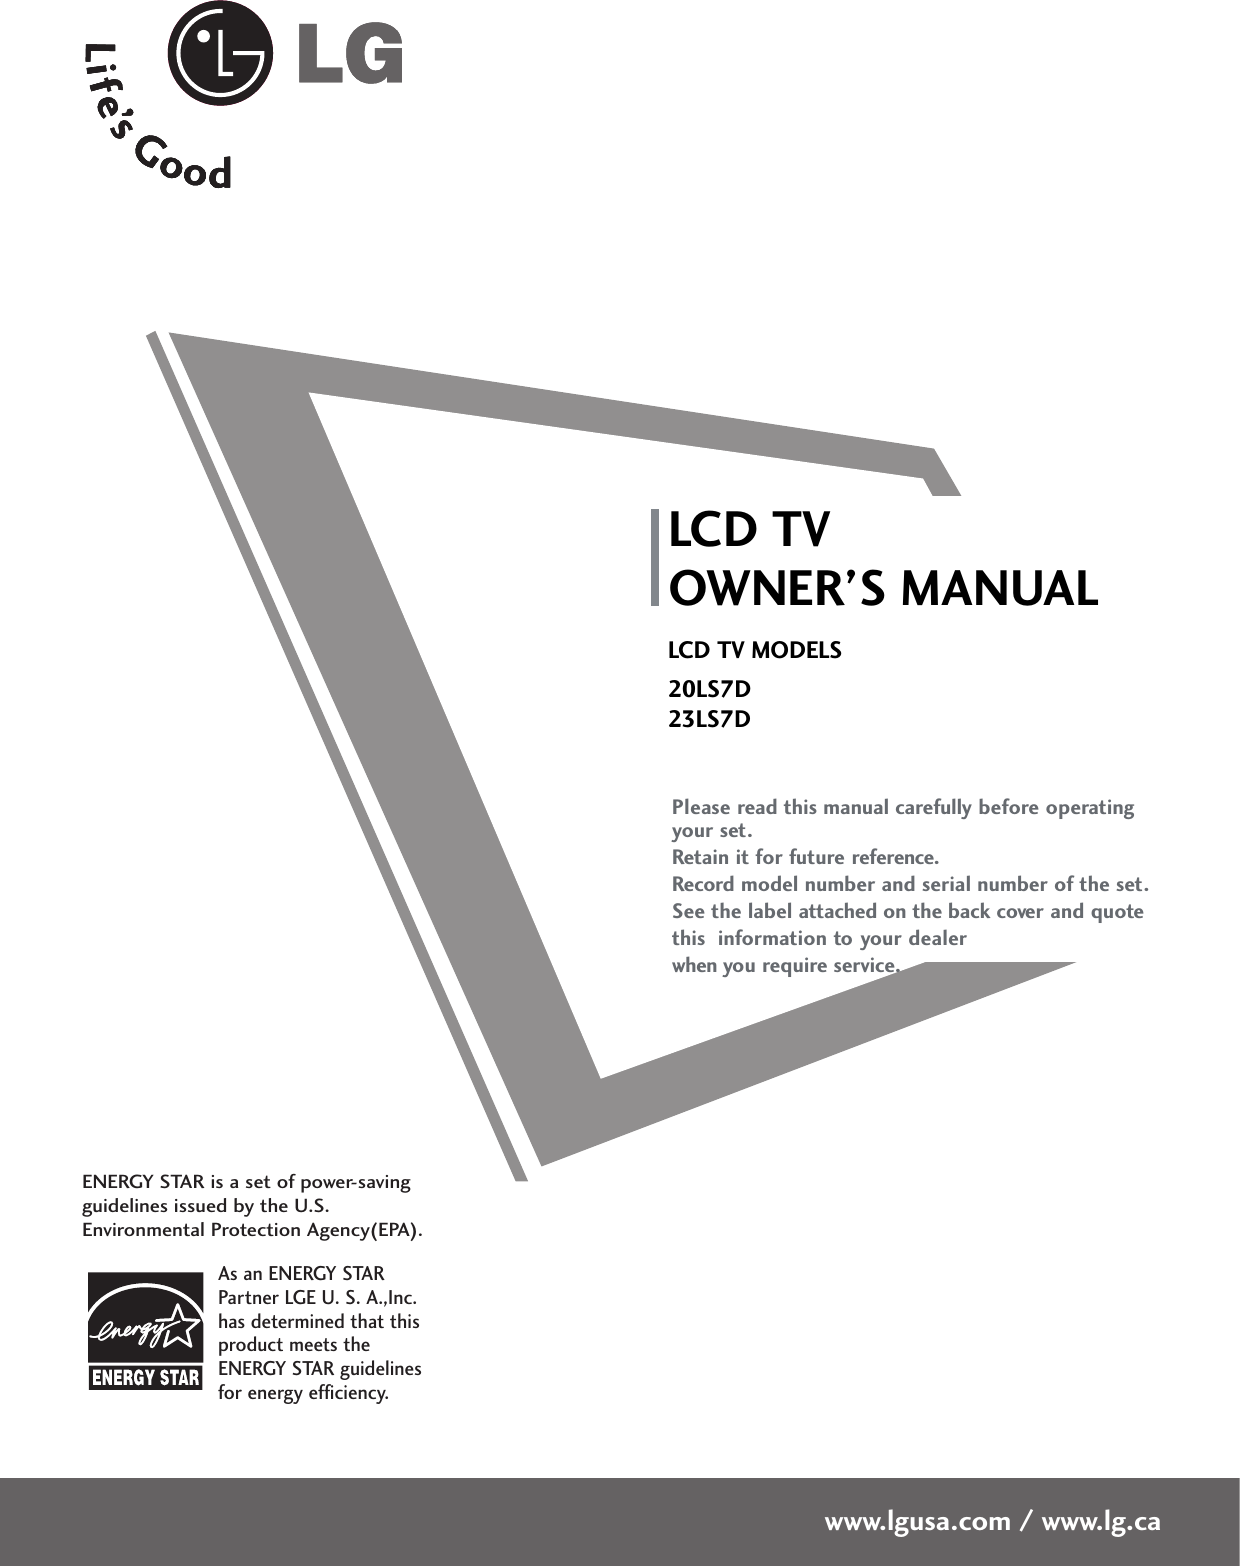 Please read this manual carefully before operatingyour set. Retain it for future reference.Record model number and serial number of the set. See the label attached on the back cover and quote this  information to your dealer when you require service.LCD TVOWNER’S MANUALLCD TV MODELS20LS7D23LS7Dwww.lgusa.com / www.lg.caAs an ENERGY STARPartner LGE U. S. A.,Inc.has determined that thisproduct meets theENERGY STAR guidelinesfor energy efficiency.ENERGY STAR is a set of power-savingguidelines issued by the U.S.Environmental Protection Agency(EPA).